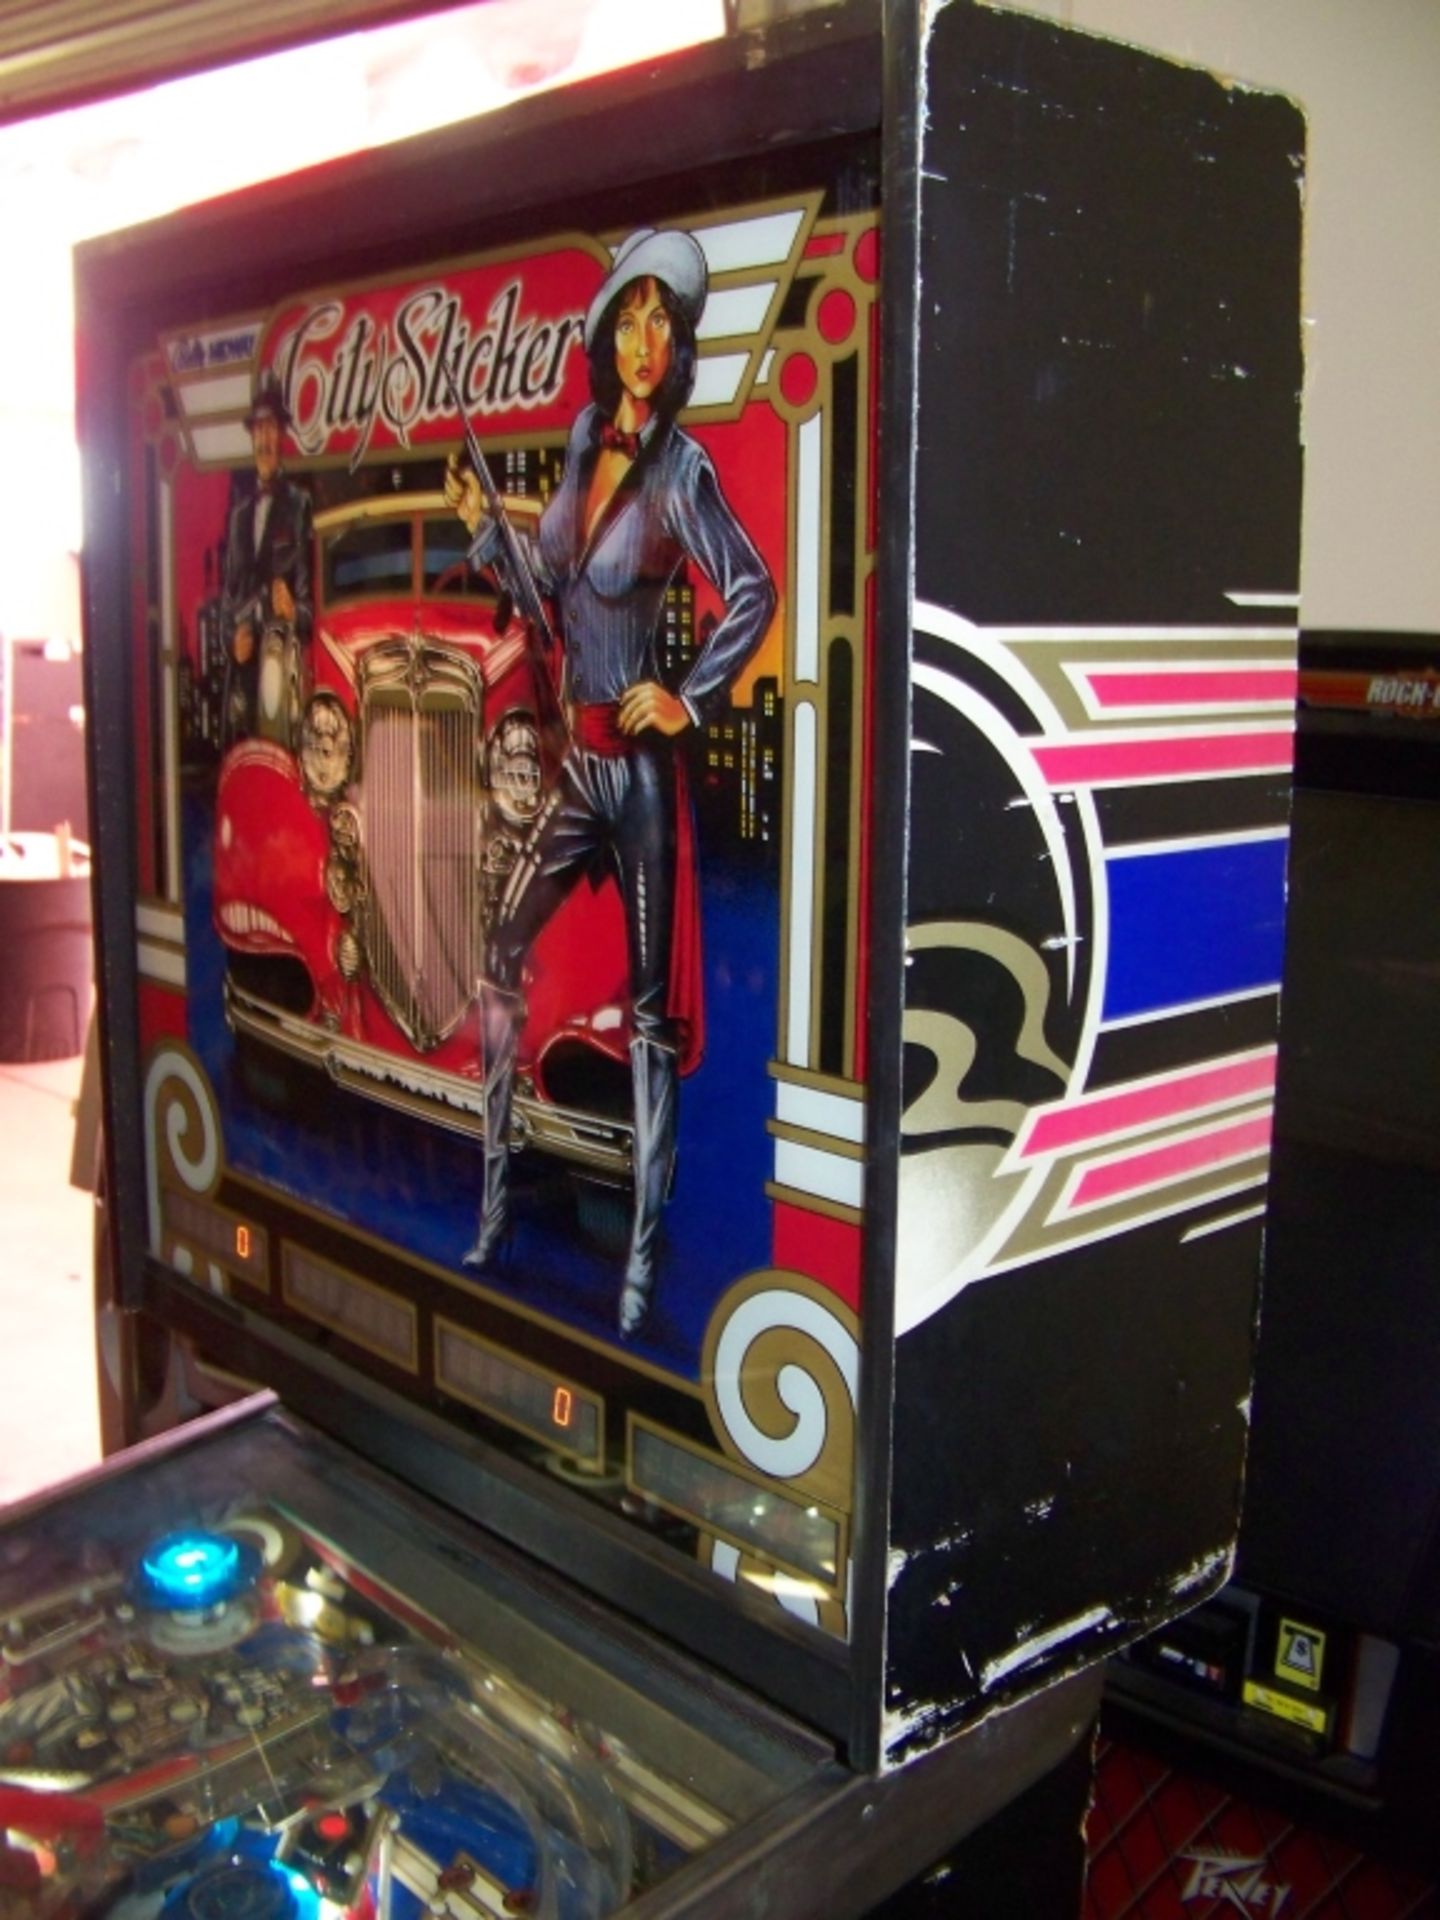 CITY SLICKER PINBALL MACHINE BALLY 1987 RARE! Item is in used condition. Evidence of wear and - Image 6 of 9